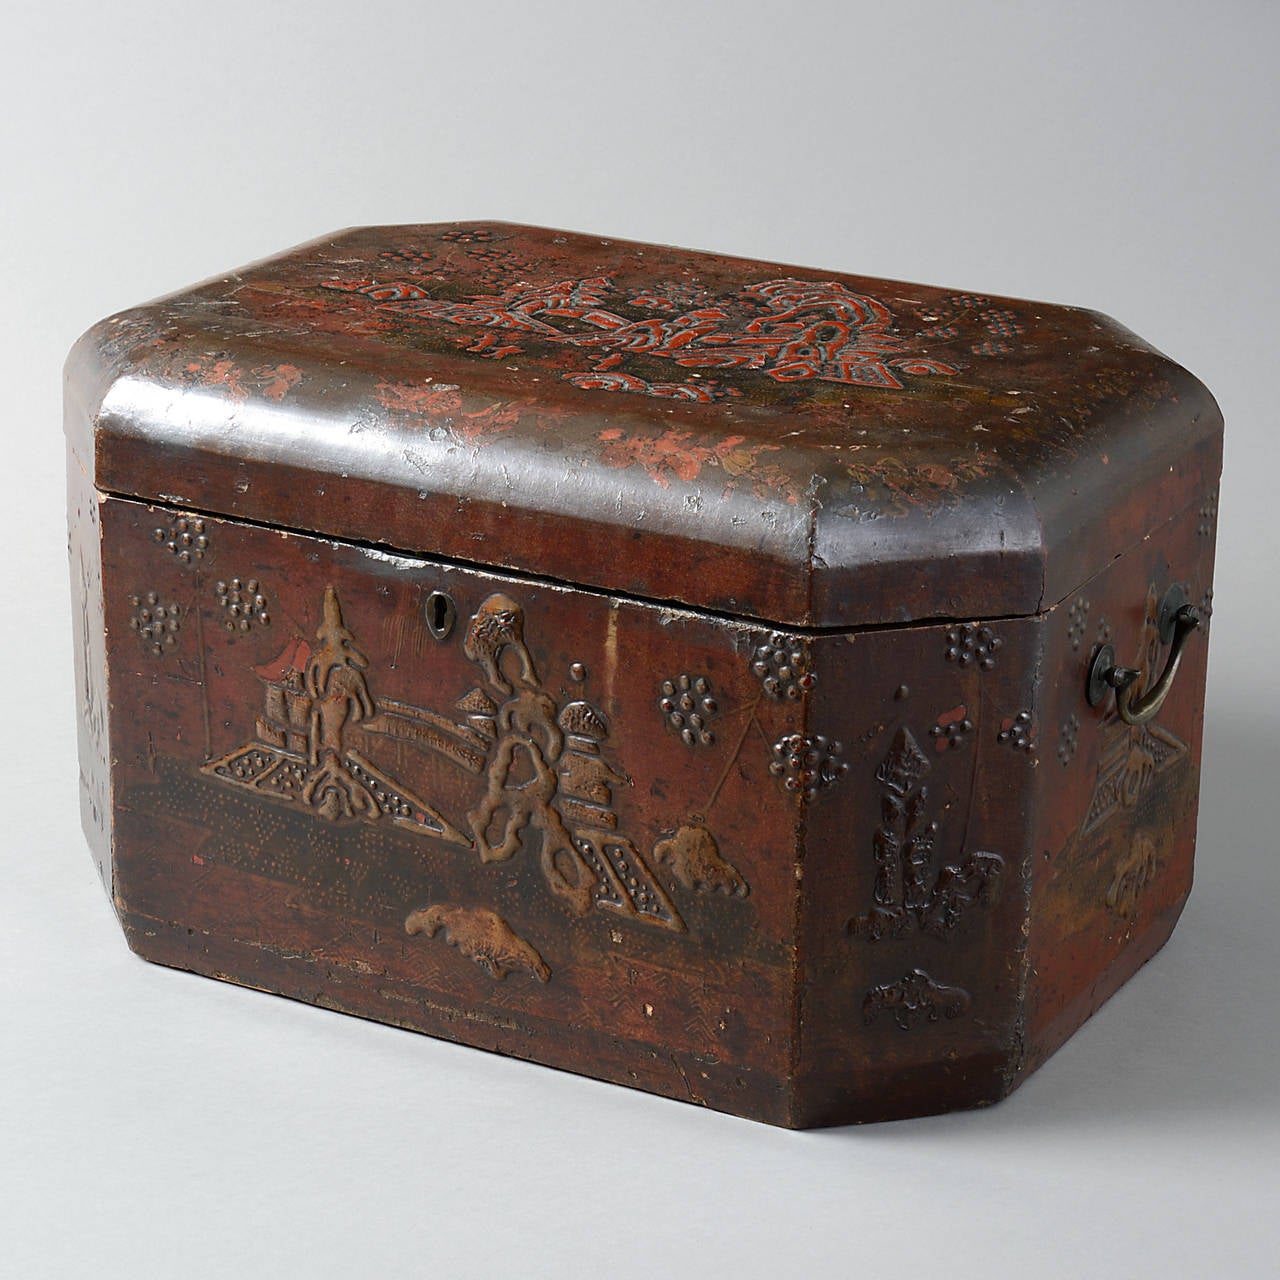 An early 19th century Chinese Export lacquer casket of rectangular form, profusely decorated with pagodas, flowers, birds and trees in a mountainous landscape having chamfered corners and the original brass carrying handles.